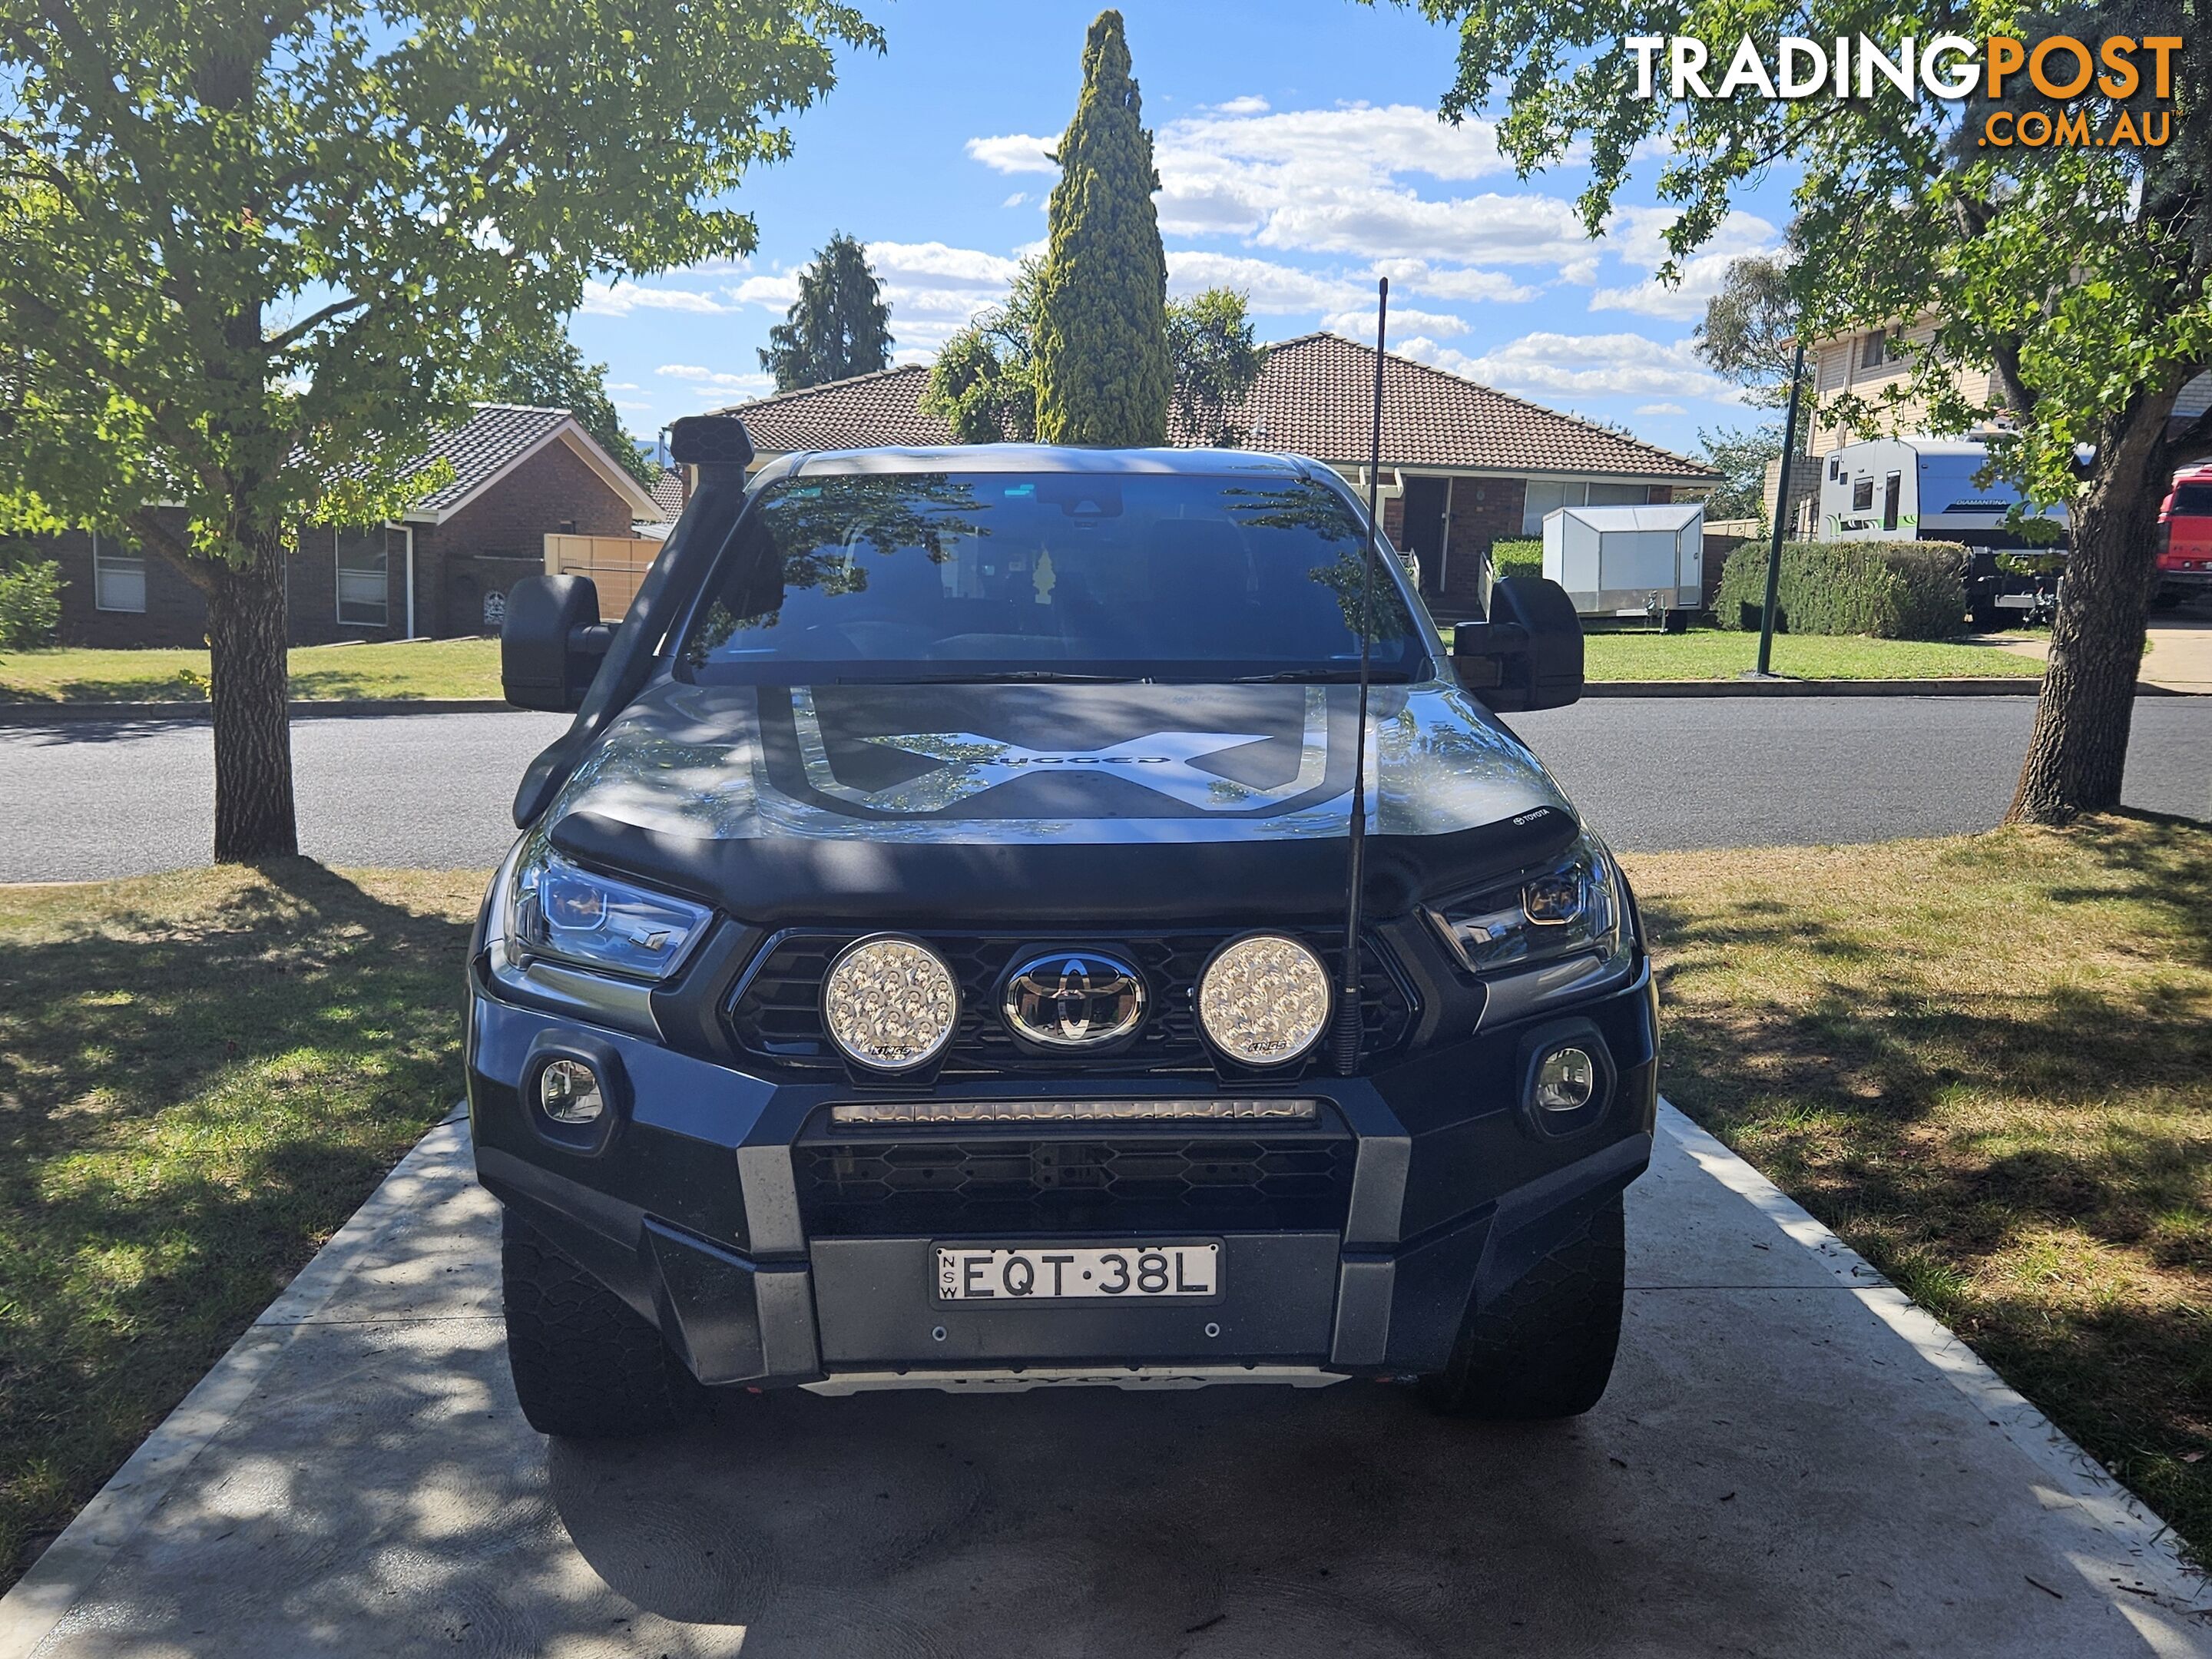 2021 Toyota Hilux Rugged X Ute Automatic